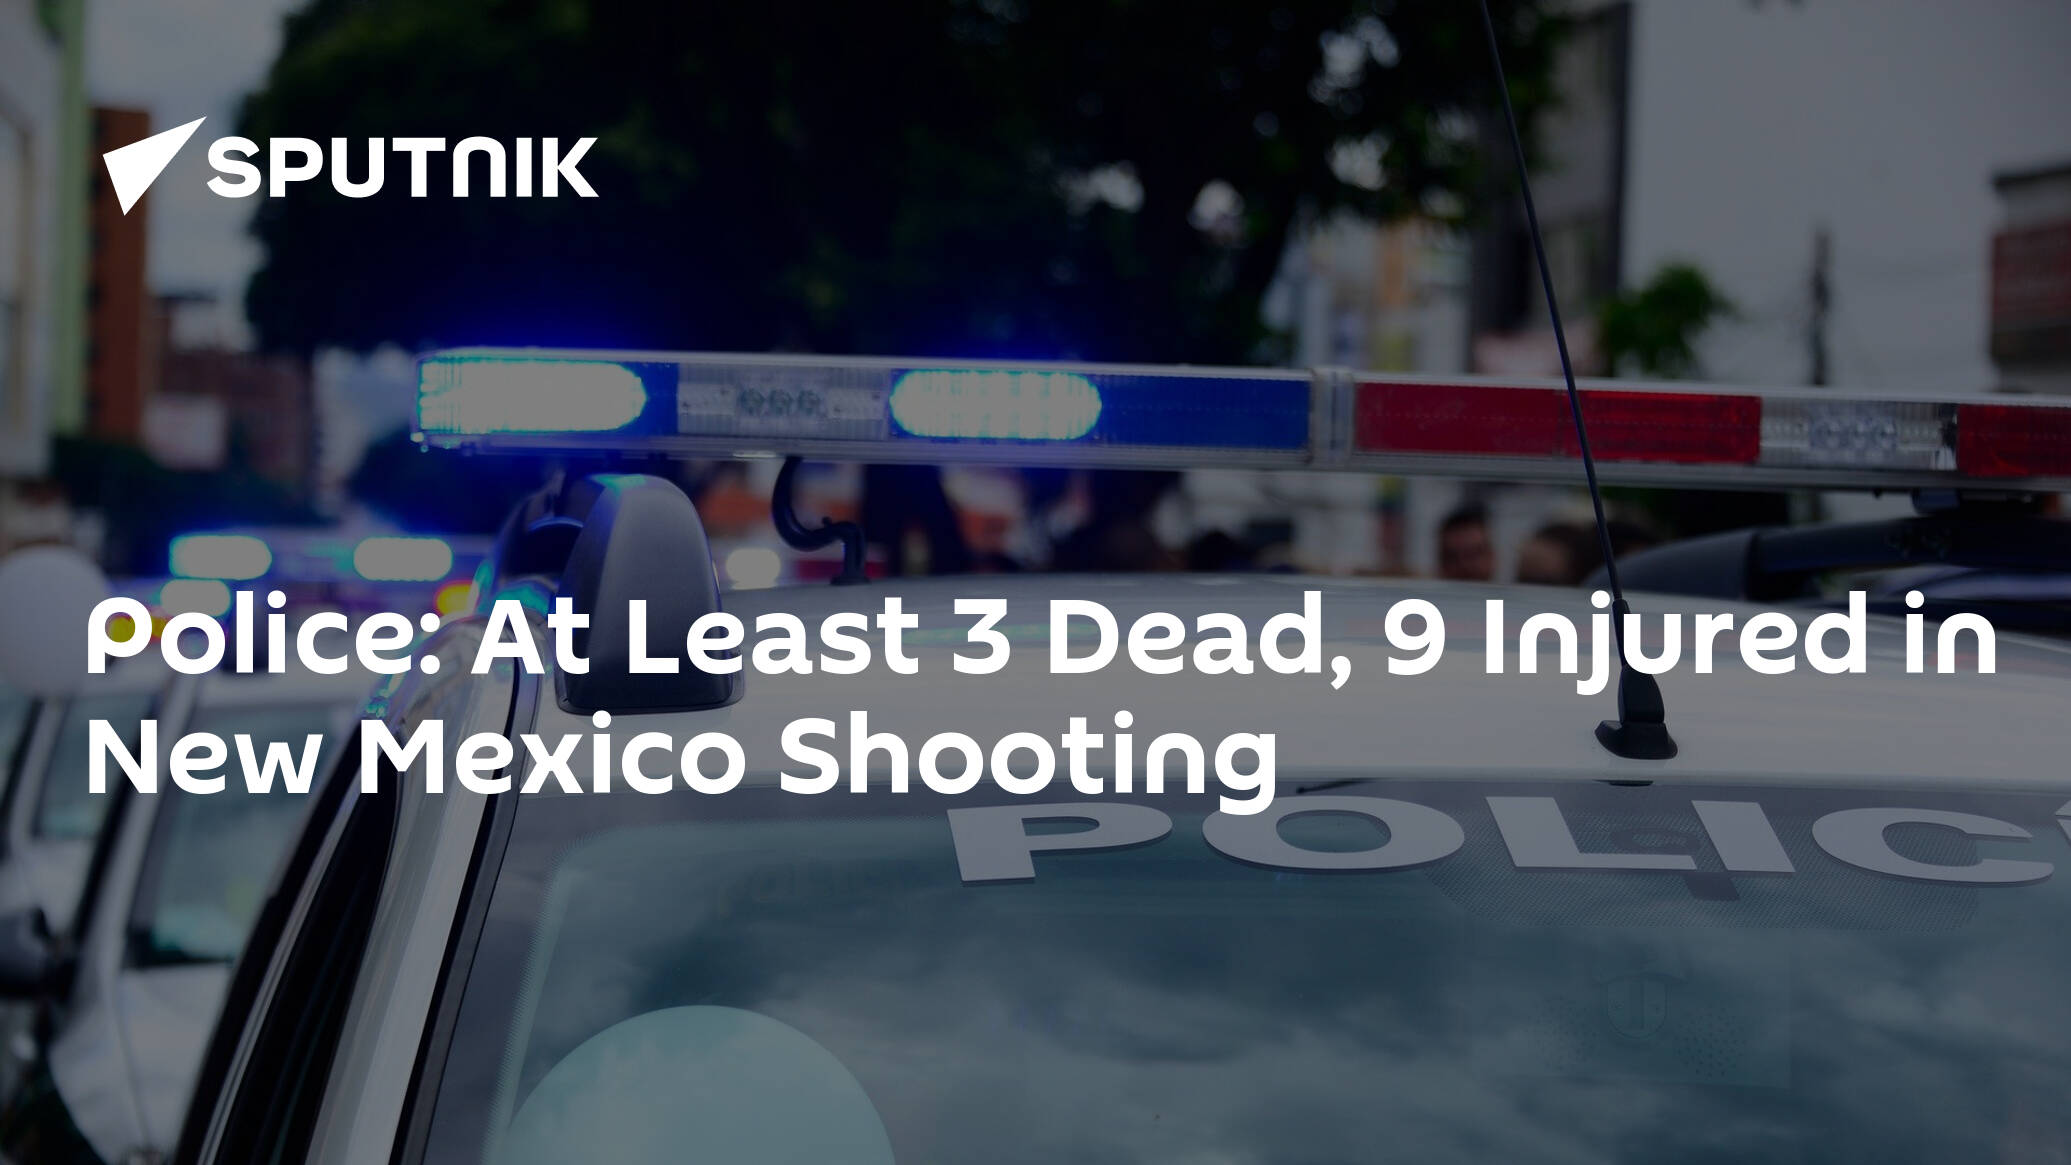 Police: At Least 3 Dead, 9 Injured in New Mexico Shooting